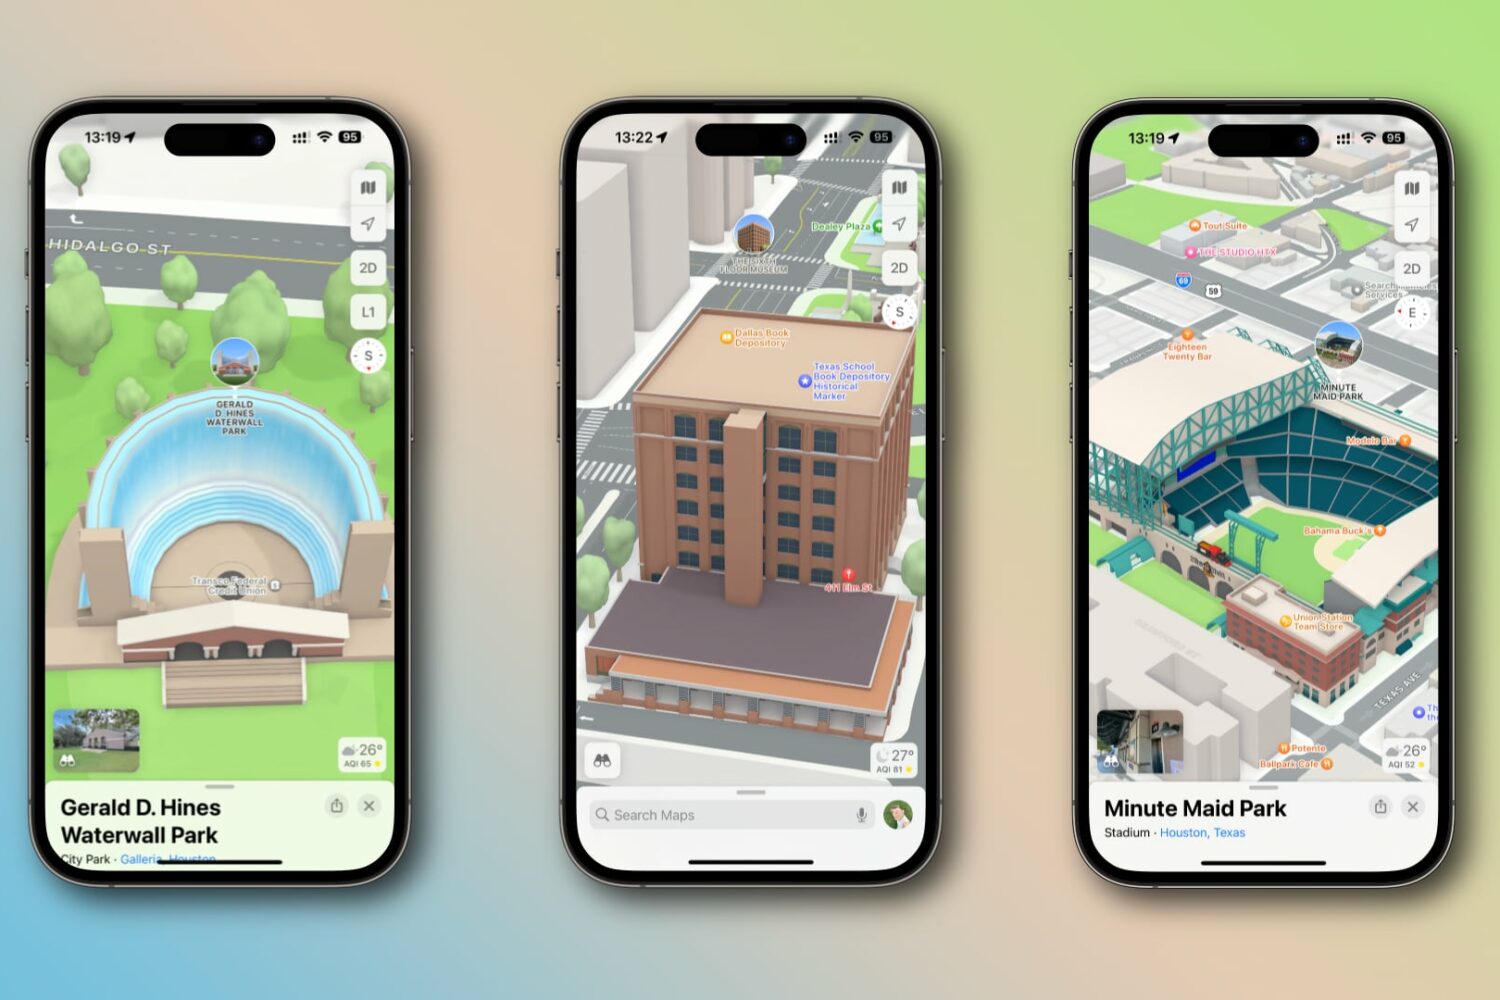 Examples of Apple Maps 3D landmarks for the Dallas and Houston areas